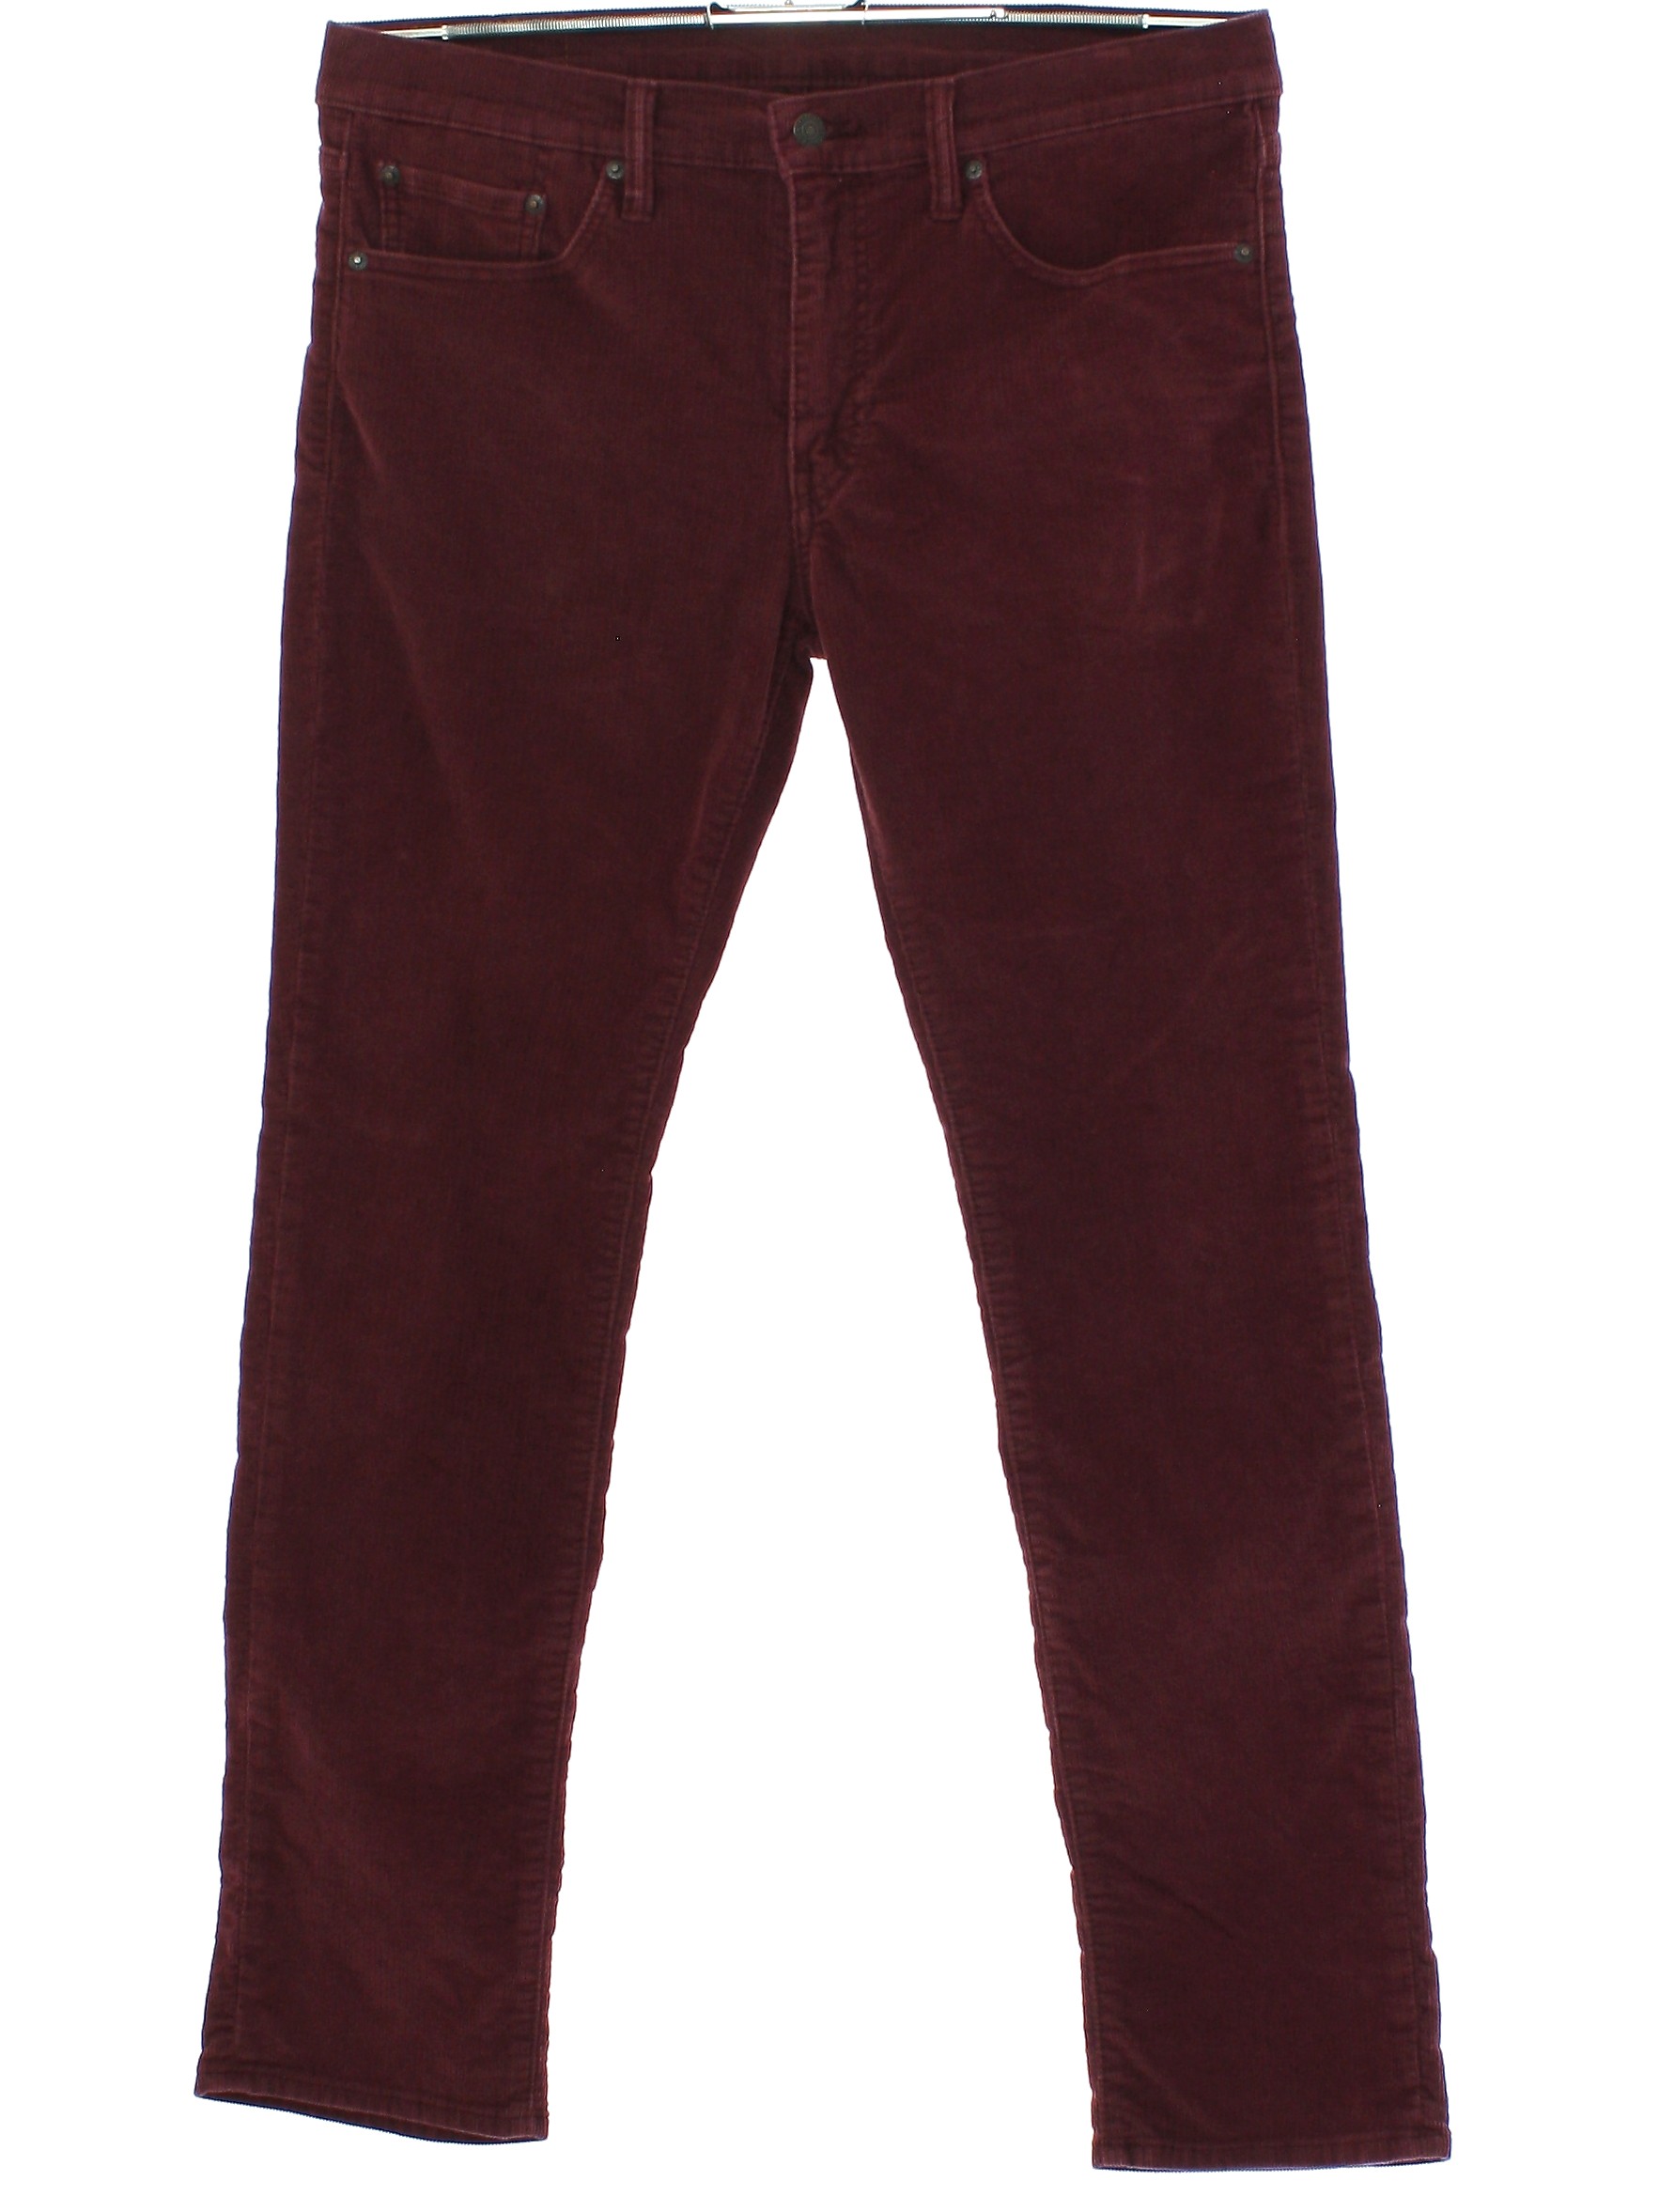 Pants: 90s -Levis- 511- Mens slightly faded burgundy red cotton corduroy  tapered leg corduroy pants with zipper fly closure with button. Five pocket  style - front scoop pockets with single coin pocket